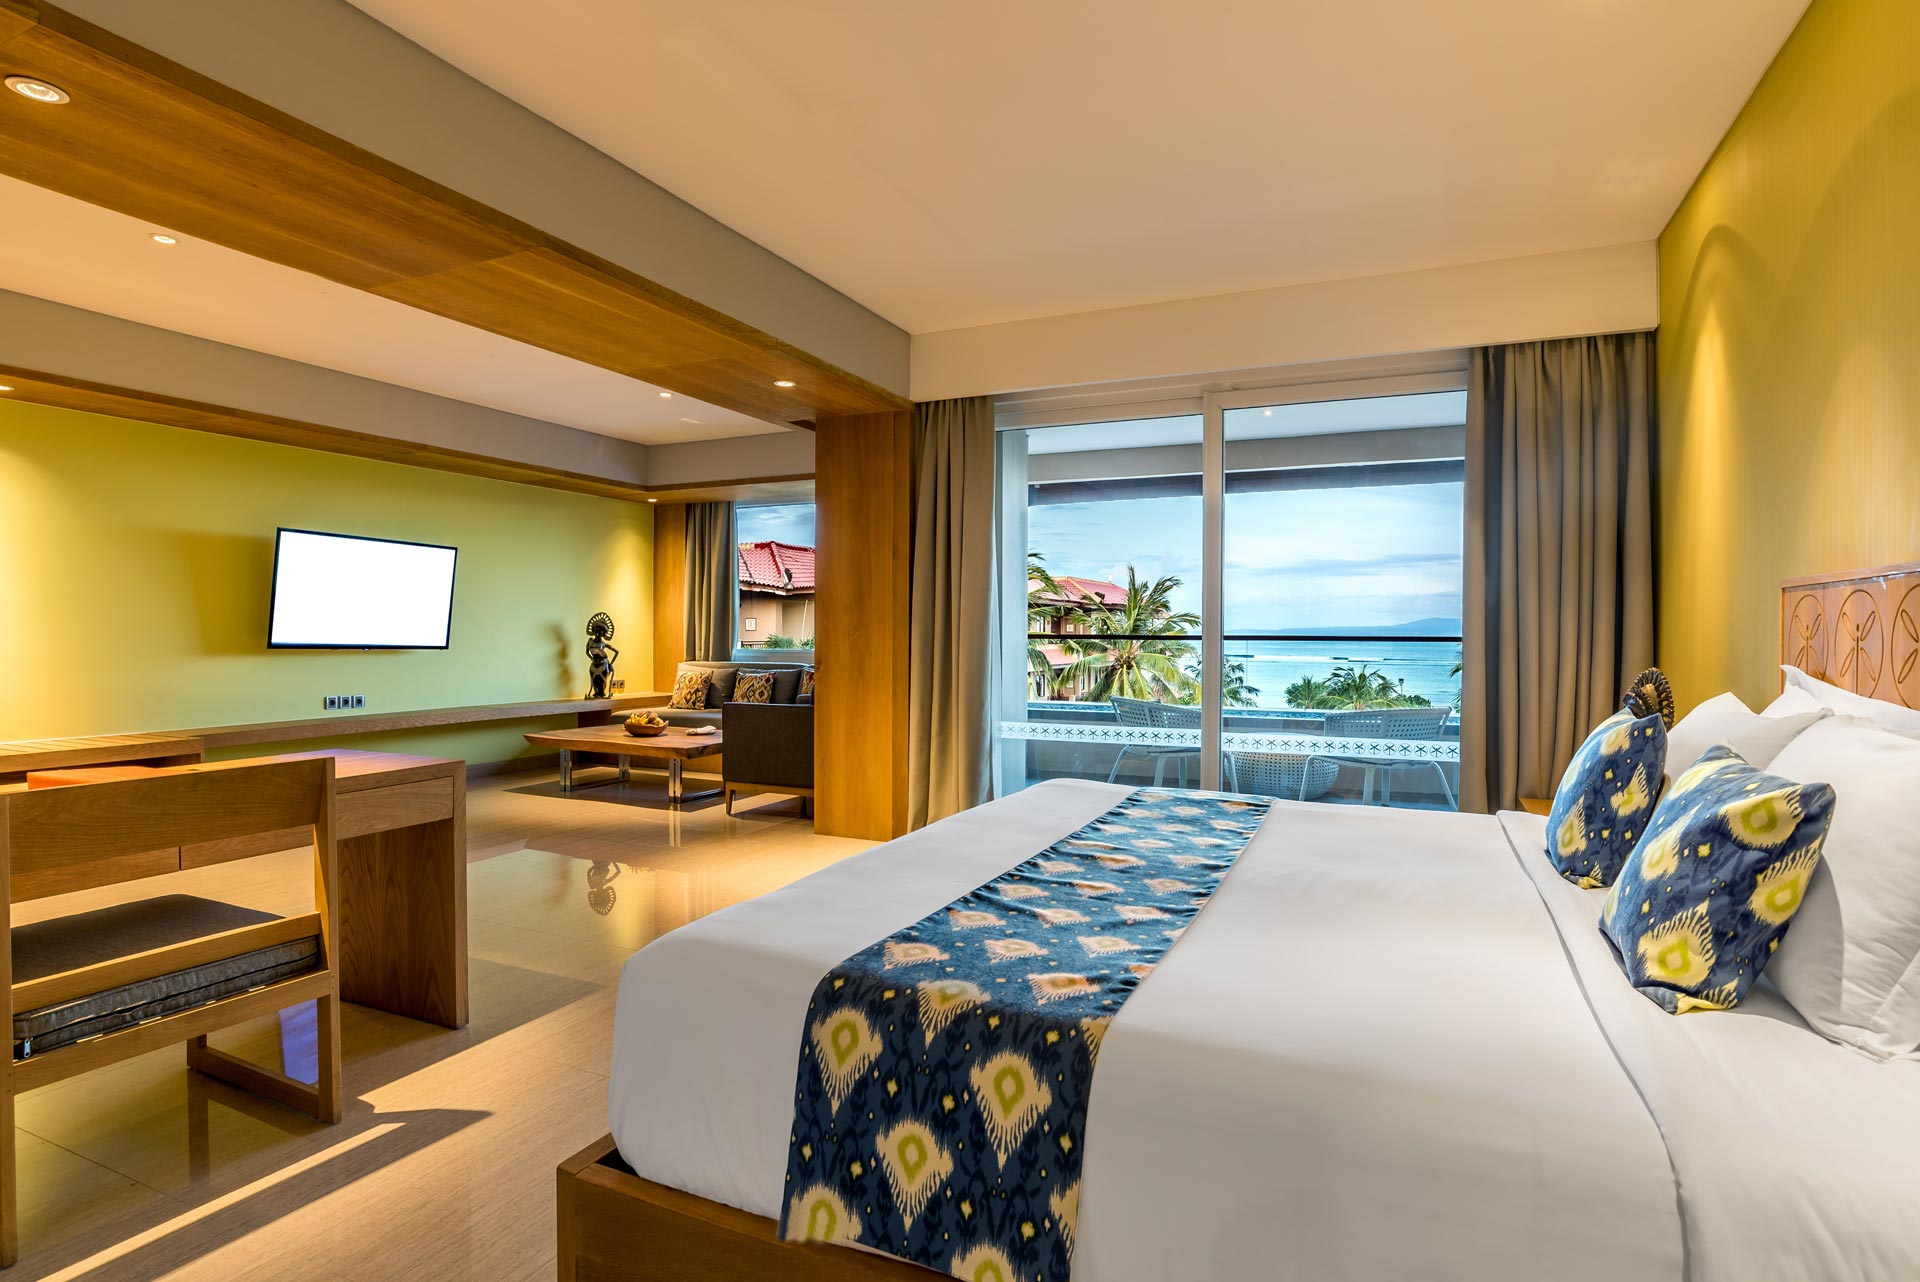 Enjoy a full view of the Indian Ocean from our Ocean View Suite and make the most of the spacious suite.